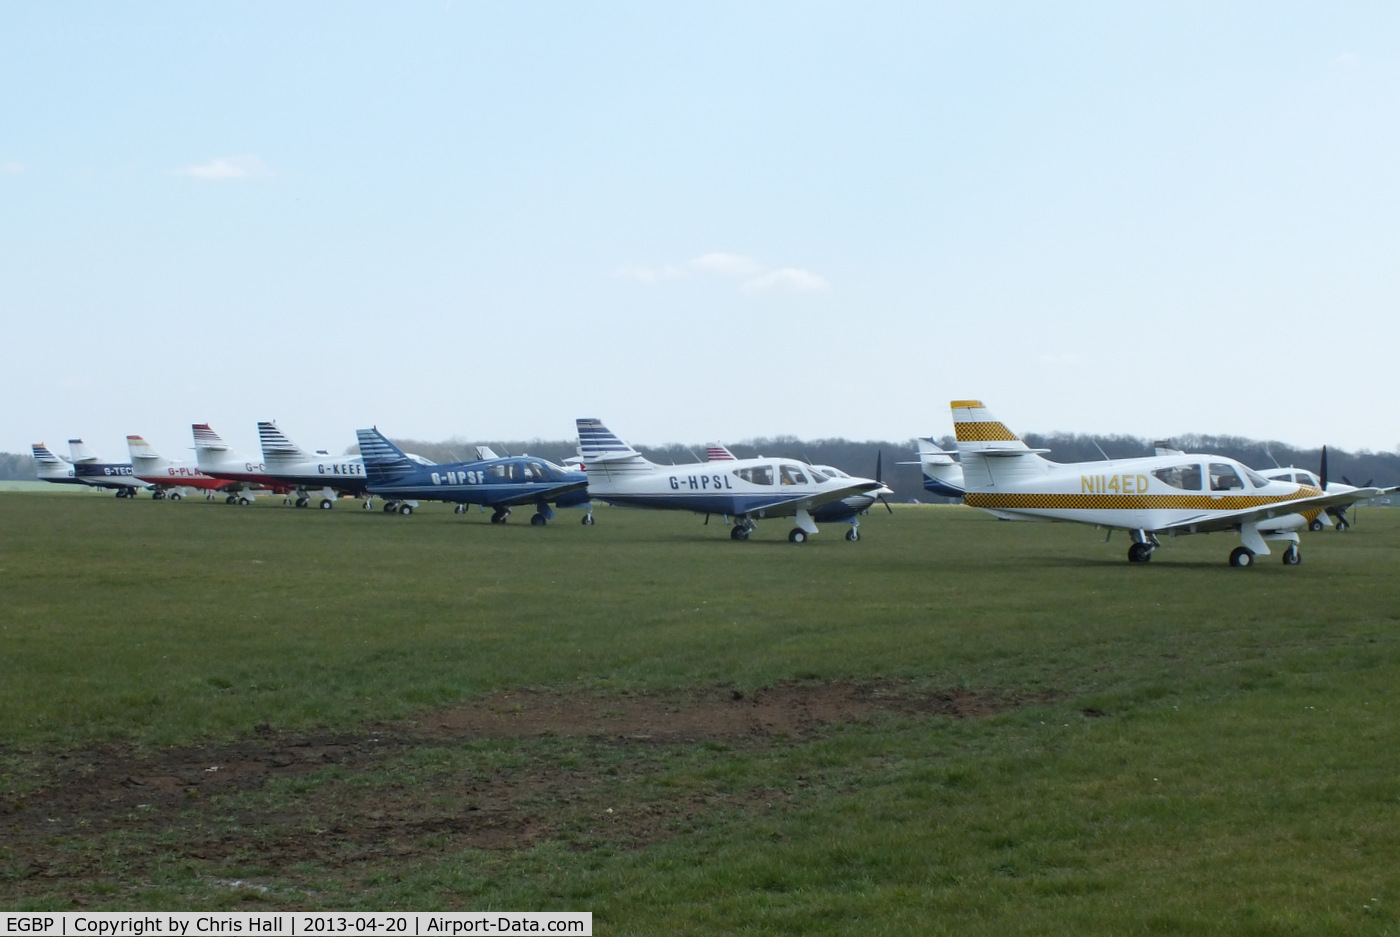 Kemble Airport, Kemble, England United Kingdom (EGBP) - Rockwell Commander fly-in at Kemble